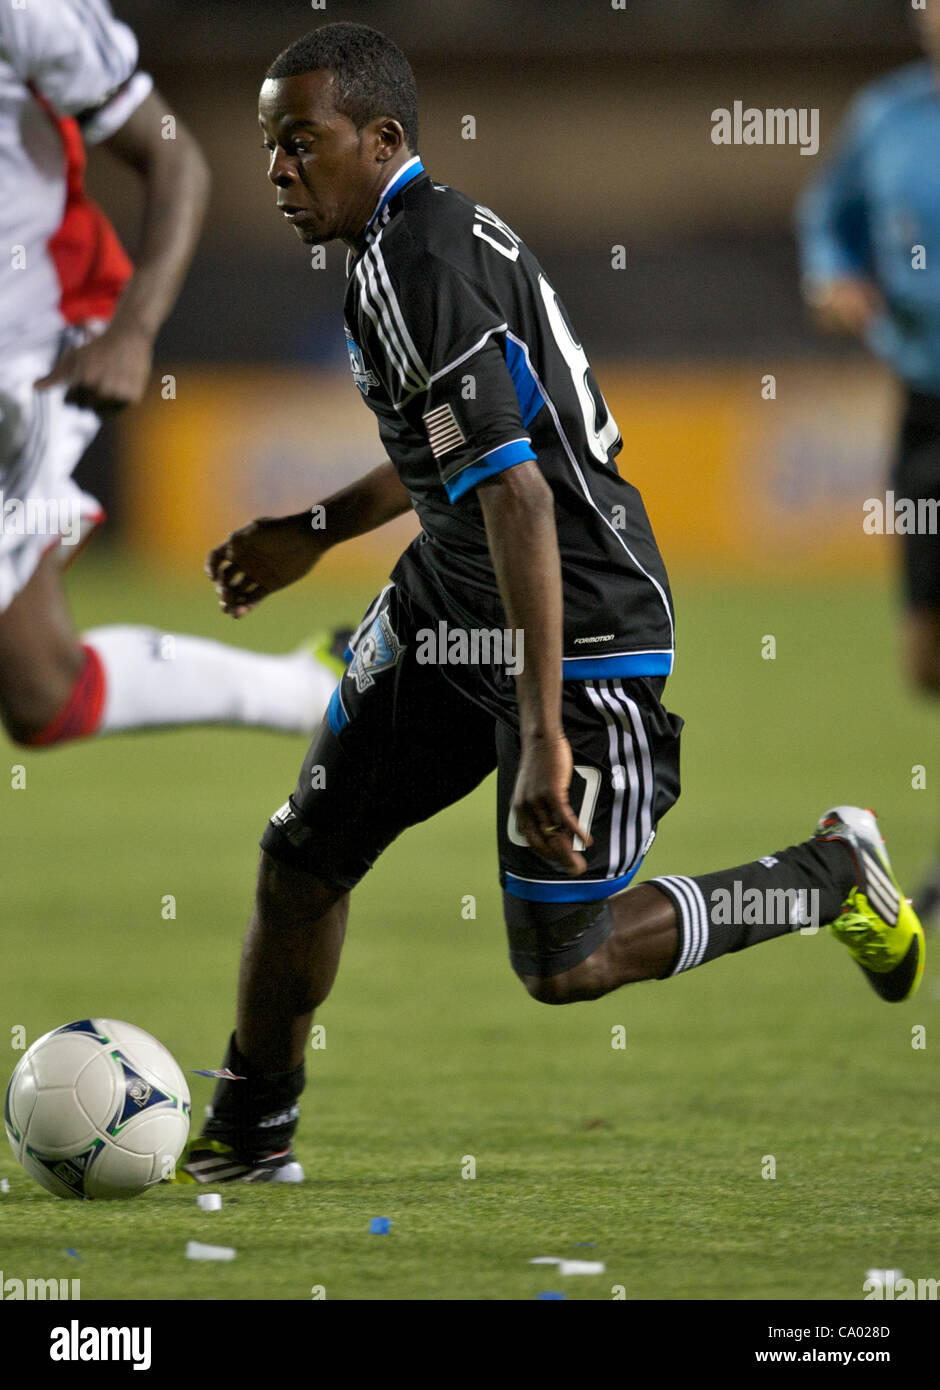 March 10, 2012 - Santa Clara, California, U.S - Earthquakes midfielder Marvin Chavez (81) carries the ball during the MLS match between the San Jose Earthquakes and New England Revolution at Buck Shaw Stadium in Santa Clara, CA.  The Earthquakes won their home opener 1-0. (Credit Image: © Matt Cohen Stock Photo